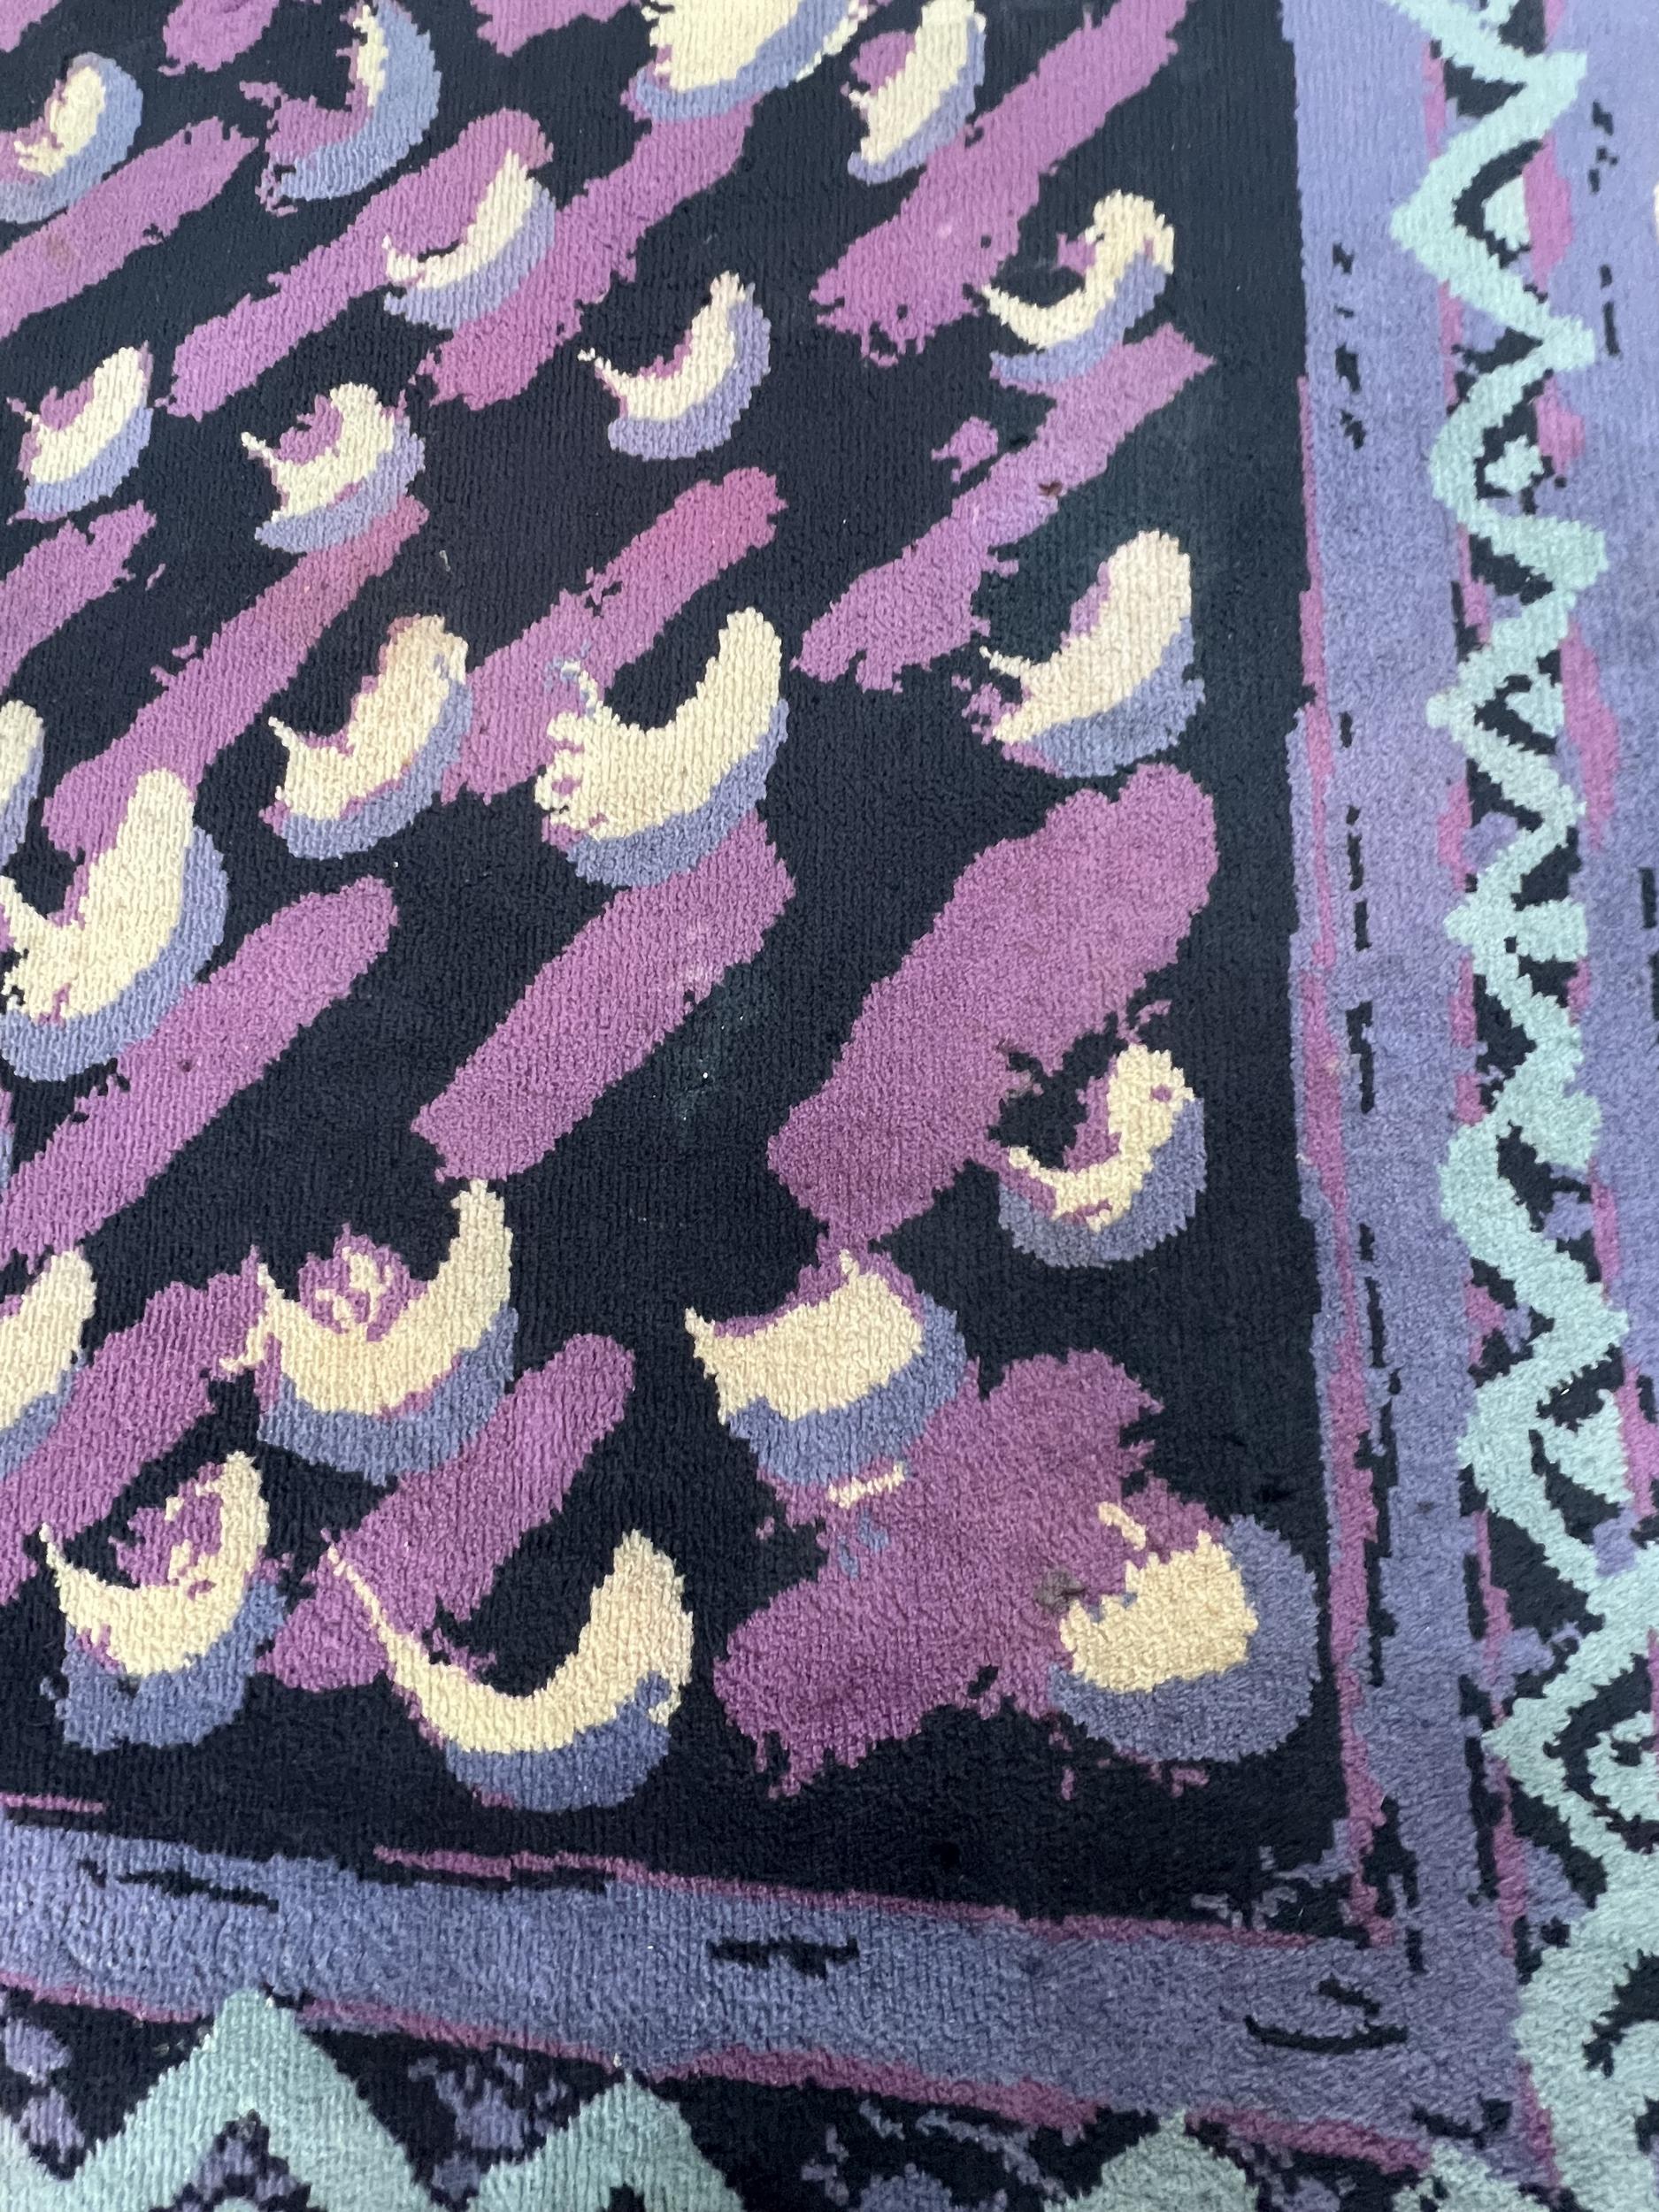 Quality rug (T5), with modernist design in blue, violet and cream on a black background.